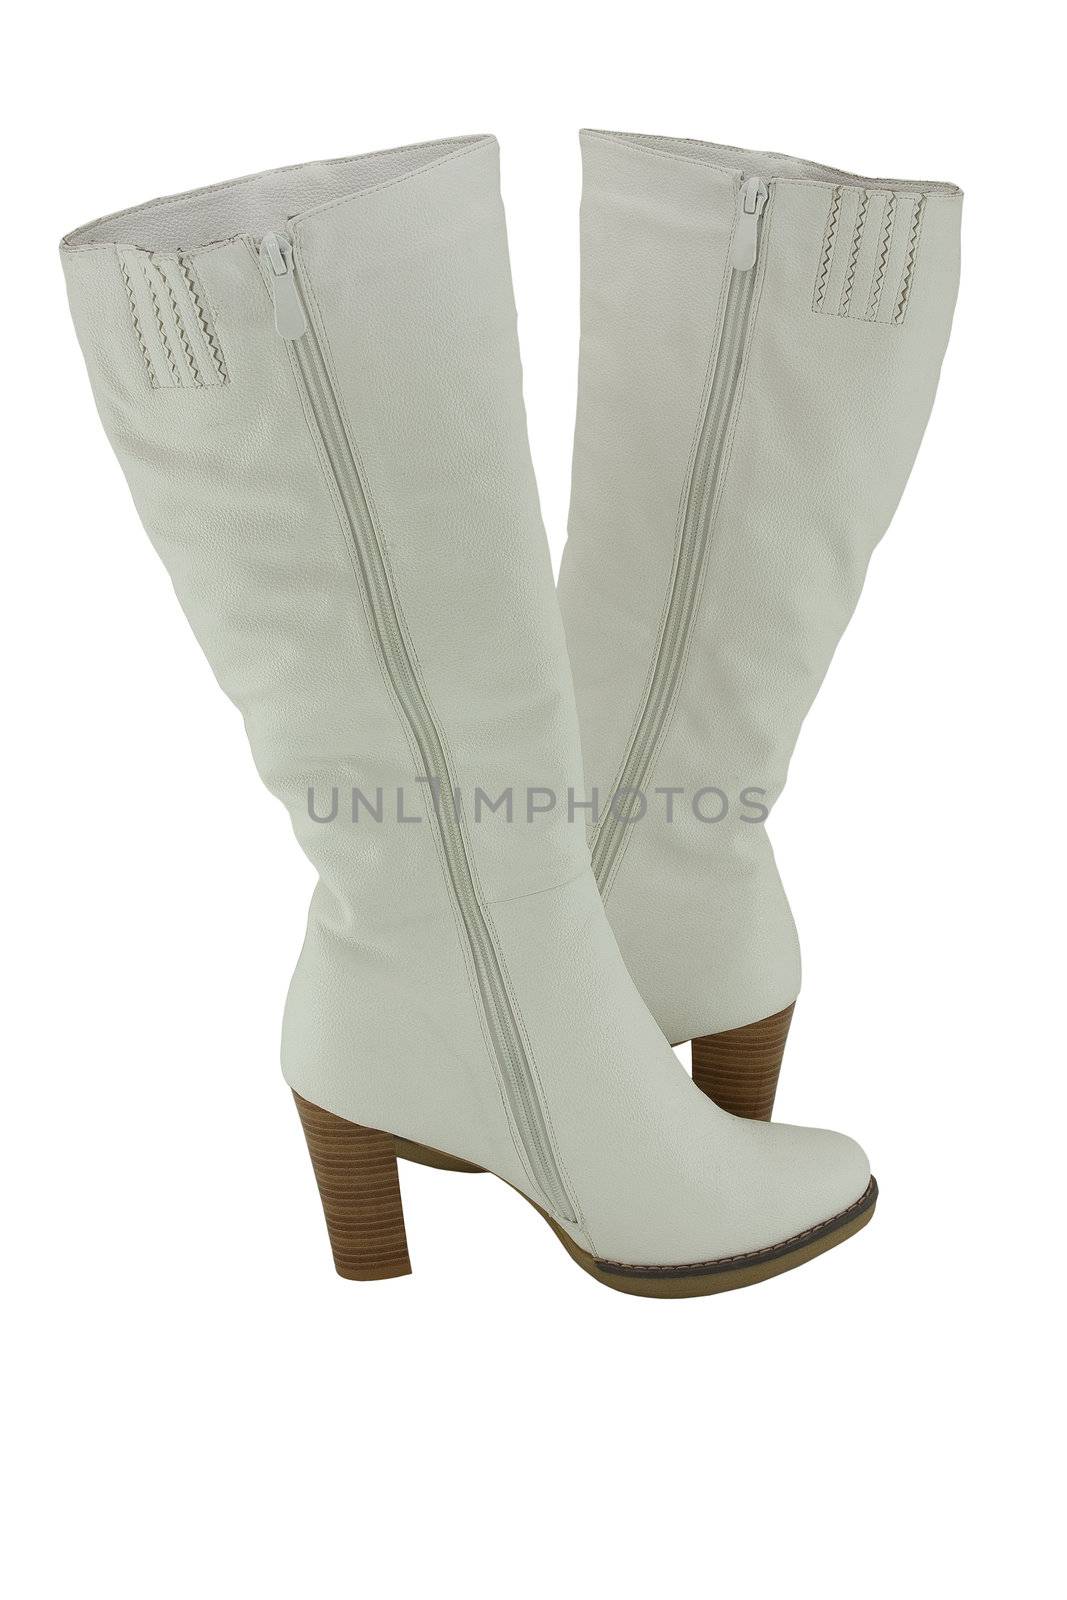 Ladies white leather boots by Jaklin